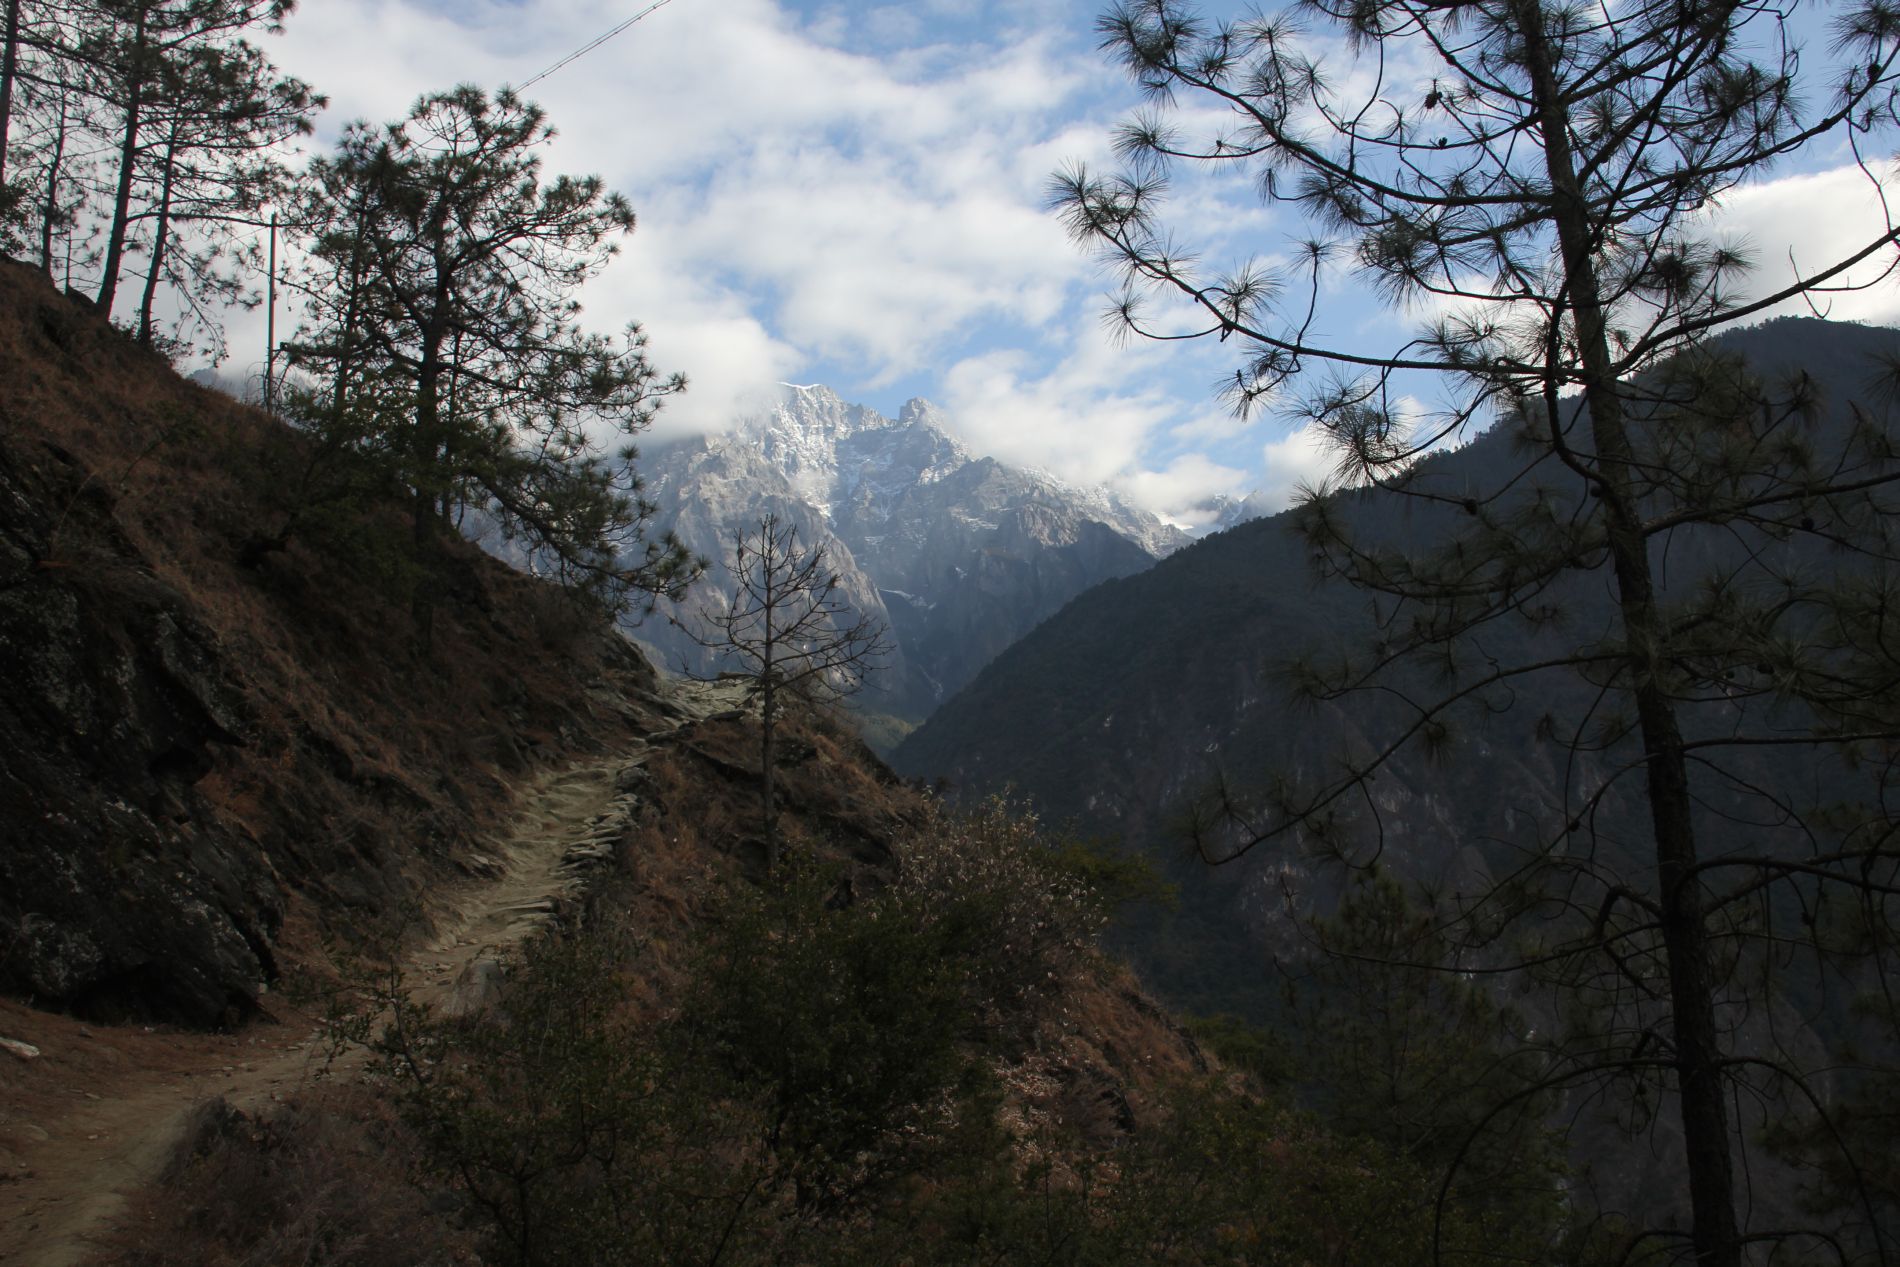 China's Tiger Leaping Gorge is one of the most beautiful wilderness areas in China.